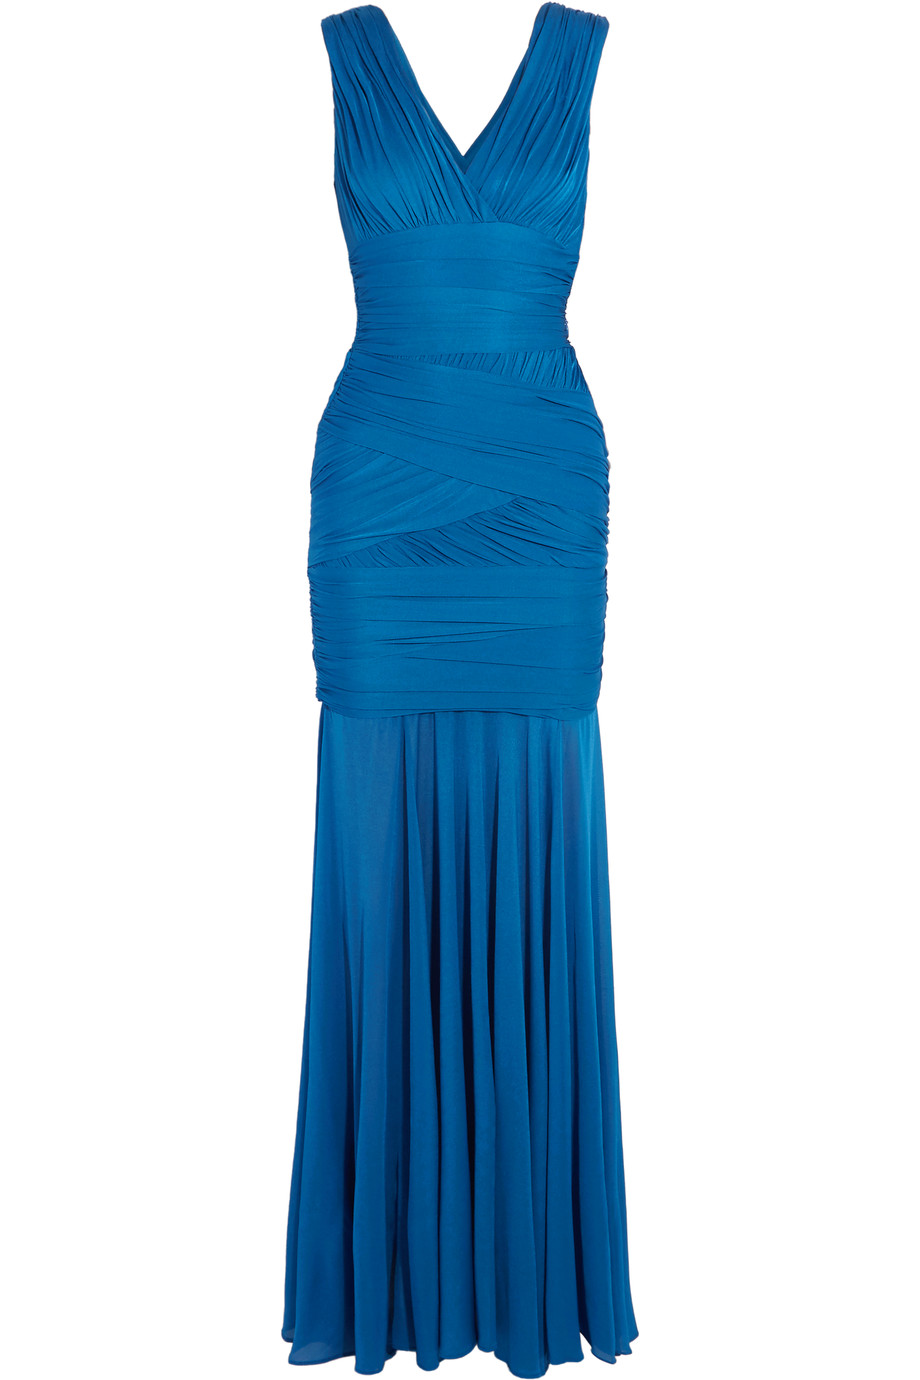 Halston Heritage Ruched Stretch-jersey Gown | ModeSens